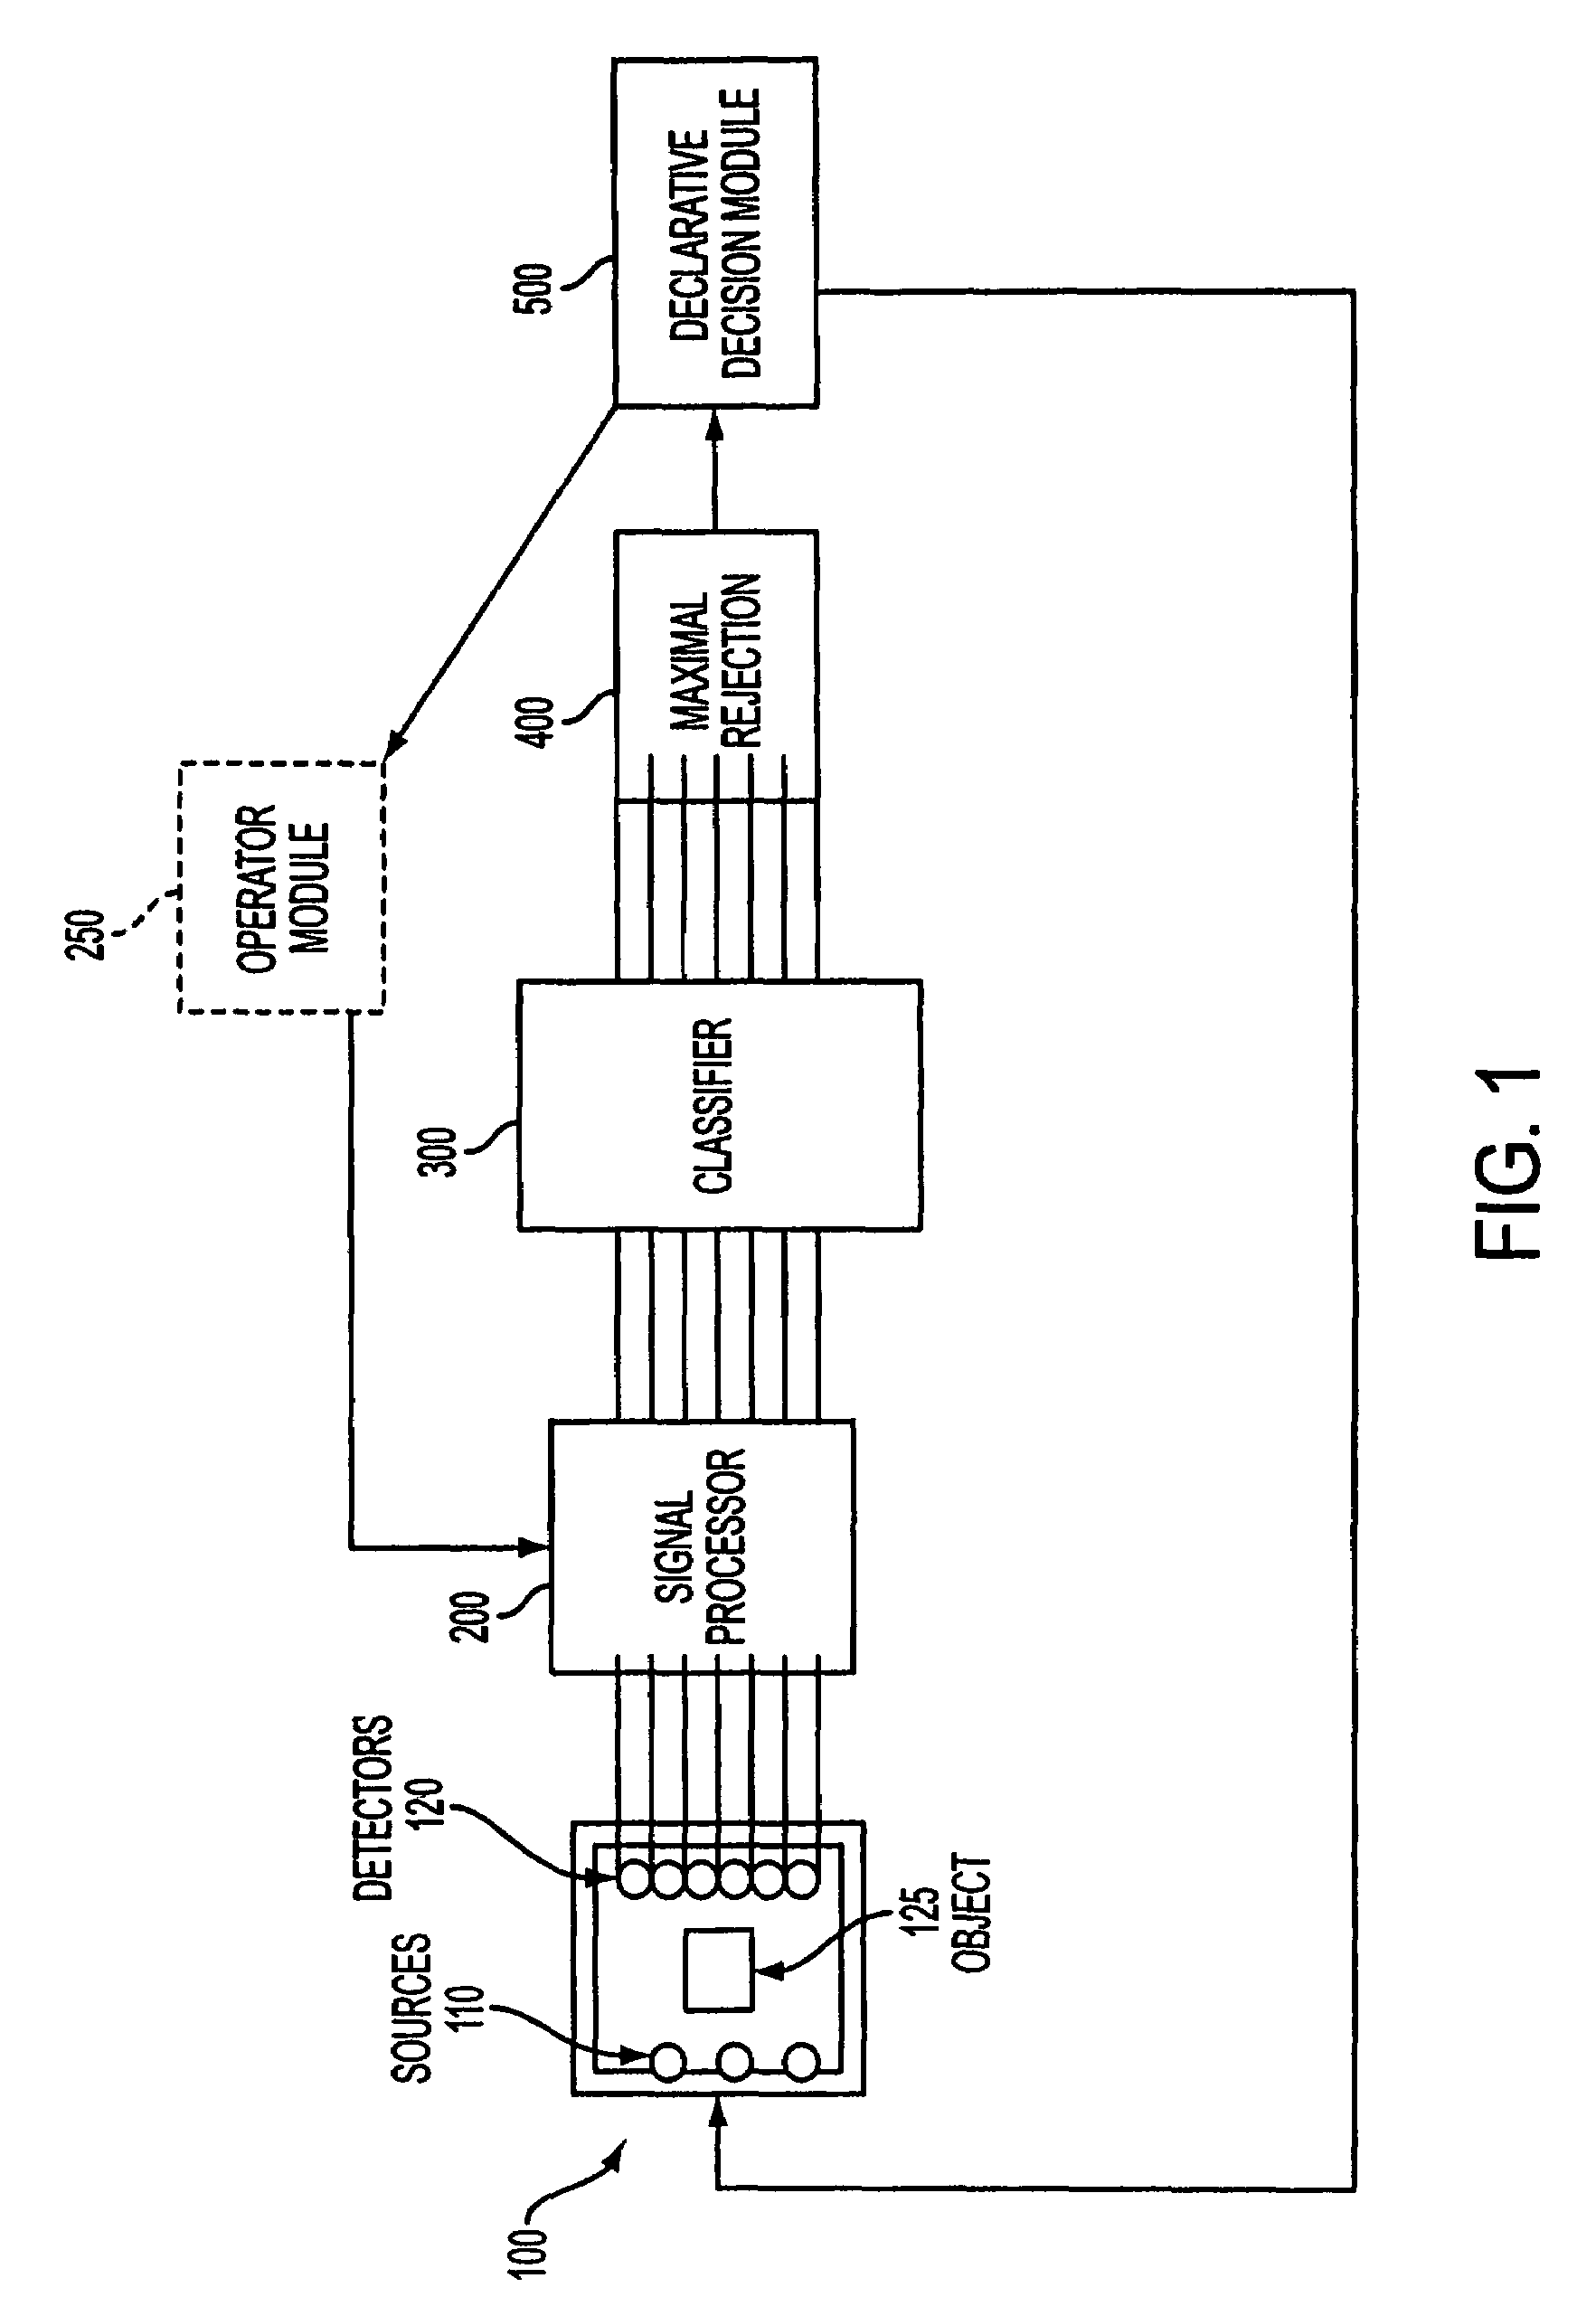 Method and apparatus for detecting and classifying explosives and controlled substances